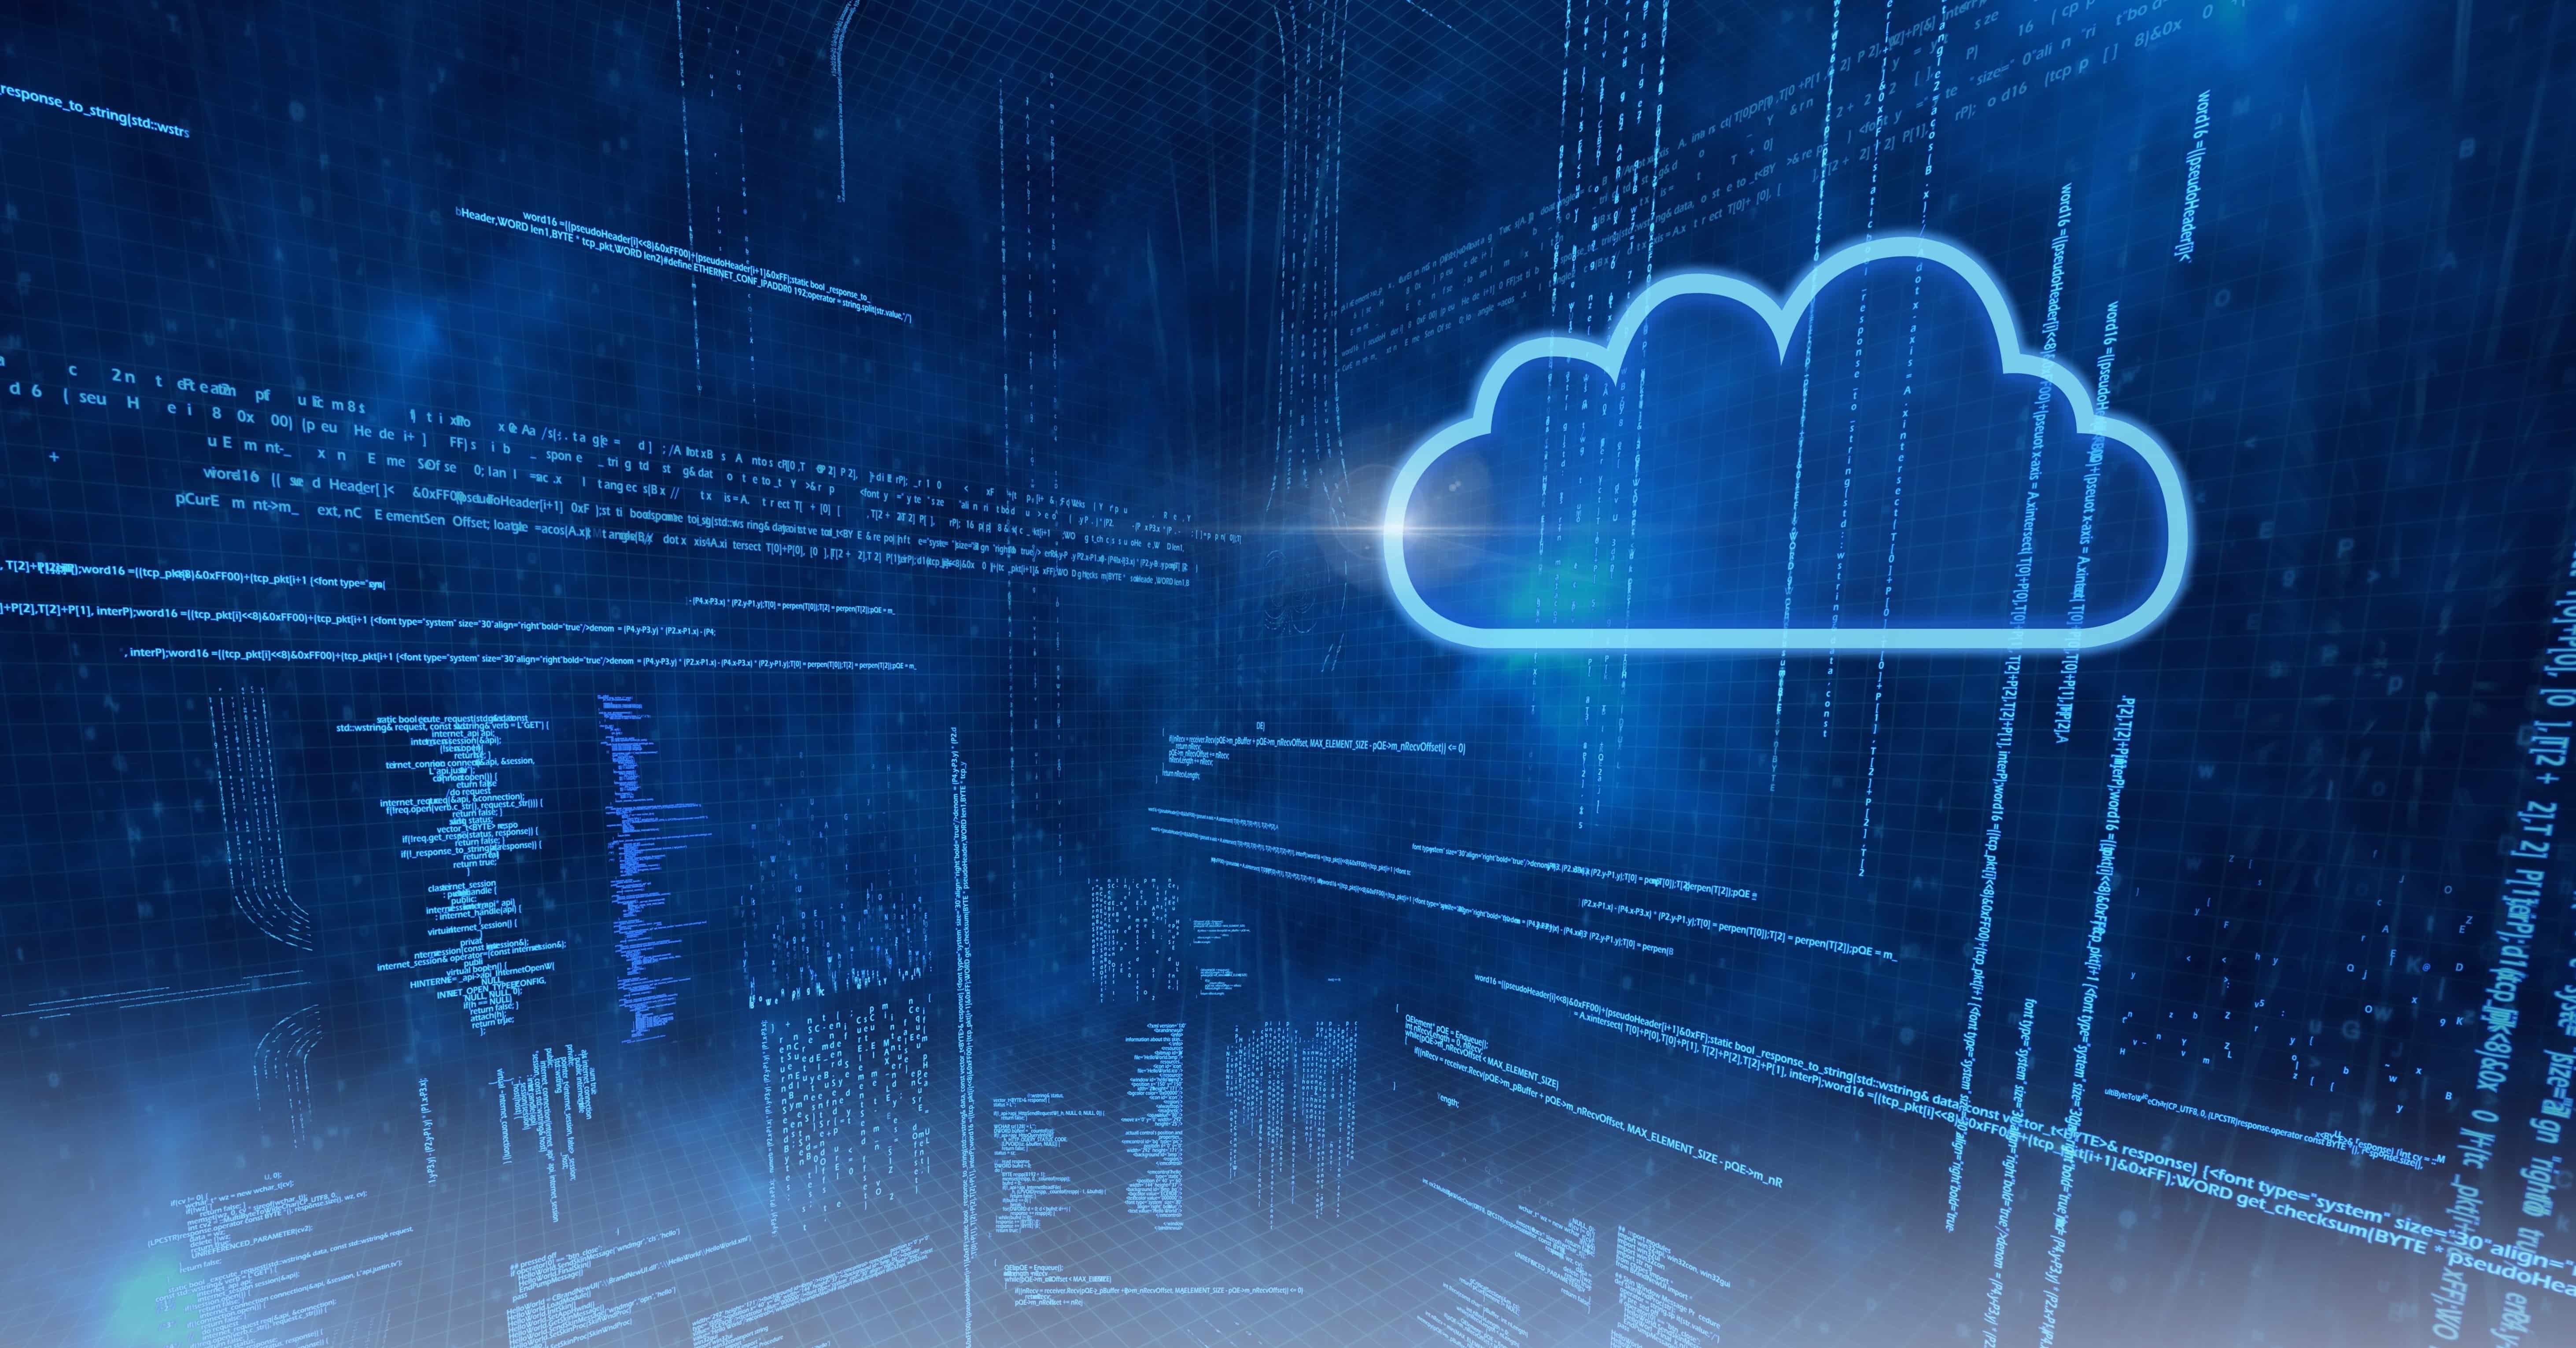 cloud icon with blue technology matrix background